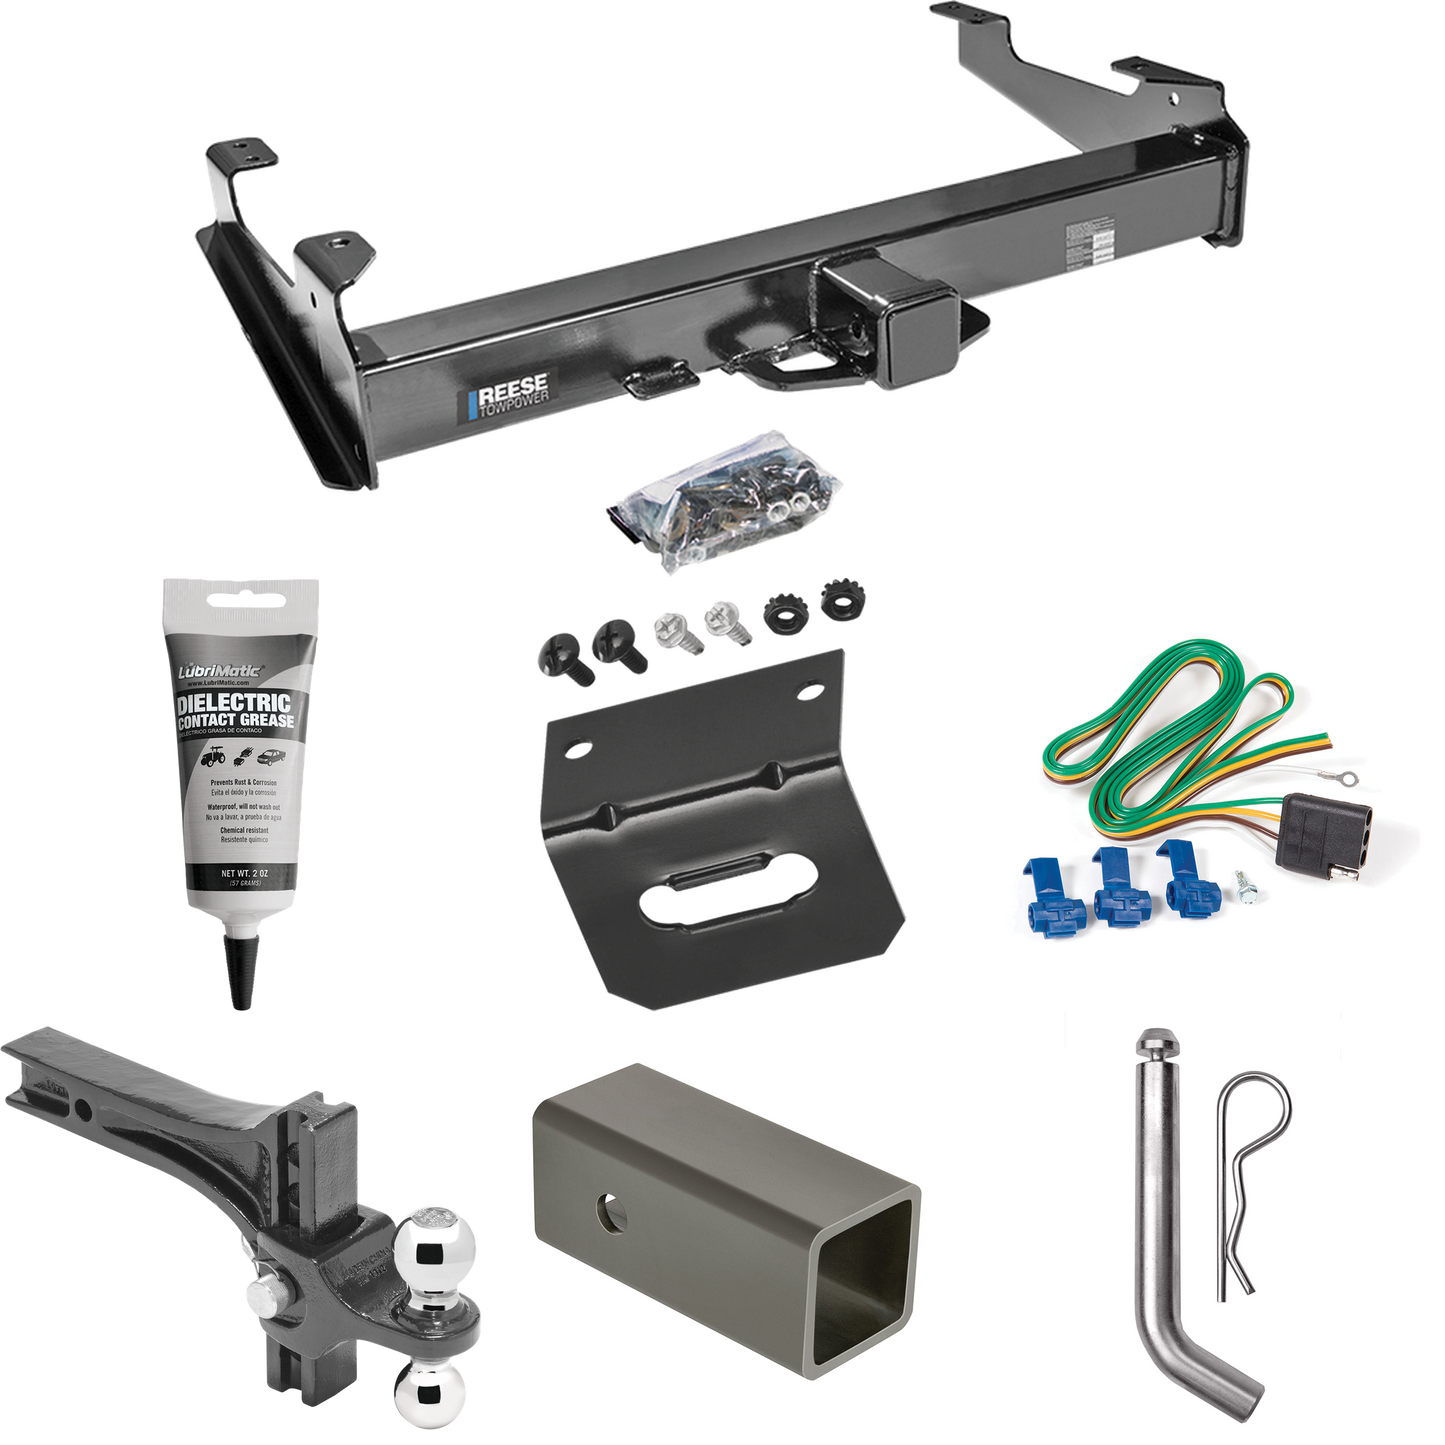 Fits 2001-2002 Chevrolet Silverado 2500 HD Trailer Hitch Tow PKG w/ 4-Flat Wiring Harness + 2-1/2" to 2" Adapter 6" Length + Adjustable Drop Rise Dual Ball Ball Mount 2" & 2-5/16" Trailer Balls + Pin/Clip + Wiring Bracket + Electric Grease (For 8 ft.